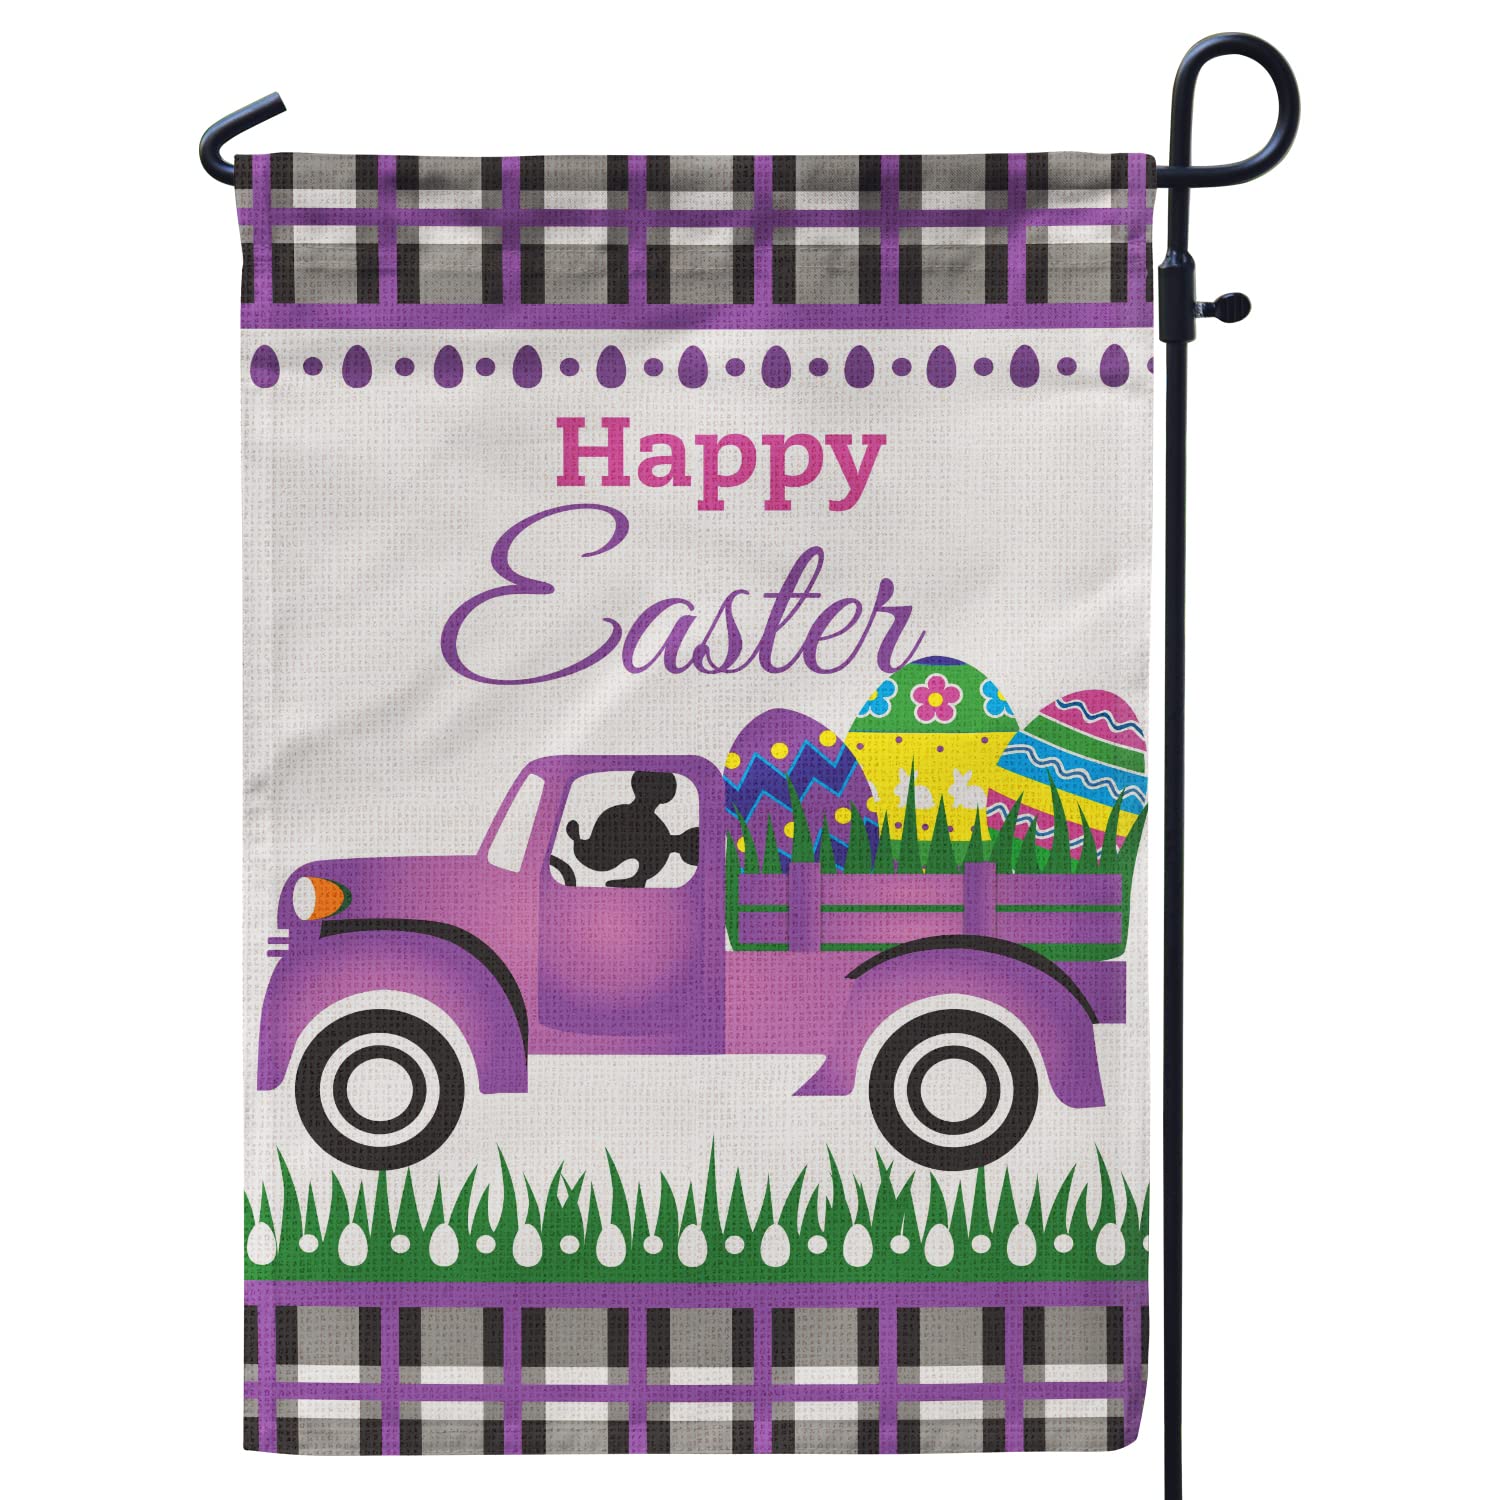 Waketree Happy Easter Garden Flag, Easter Yard Decorations Flag 12X18 Verticle Burlap Double Sided Decor For Home Outdooroutside